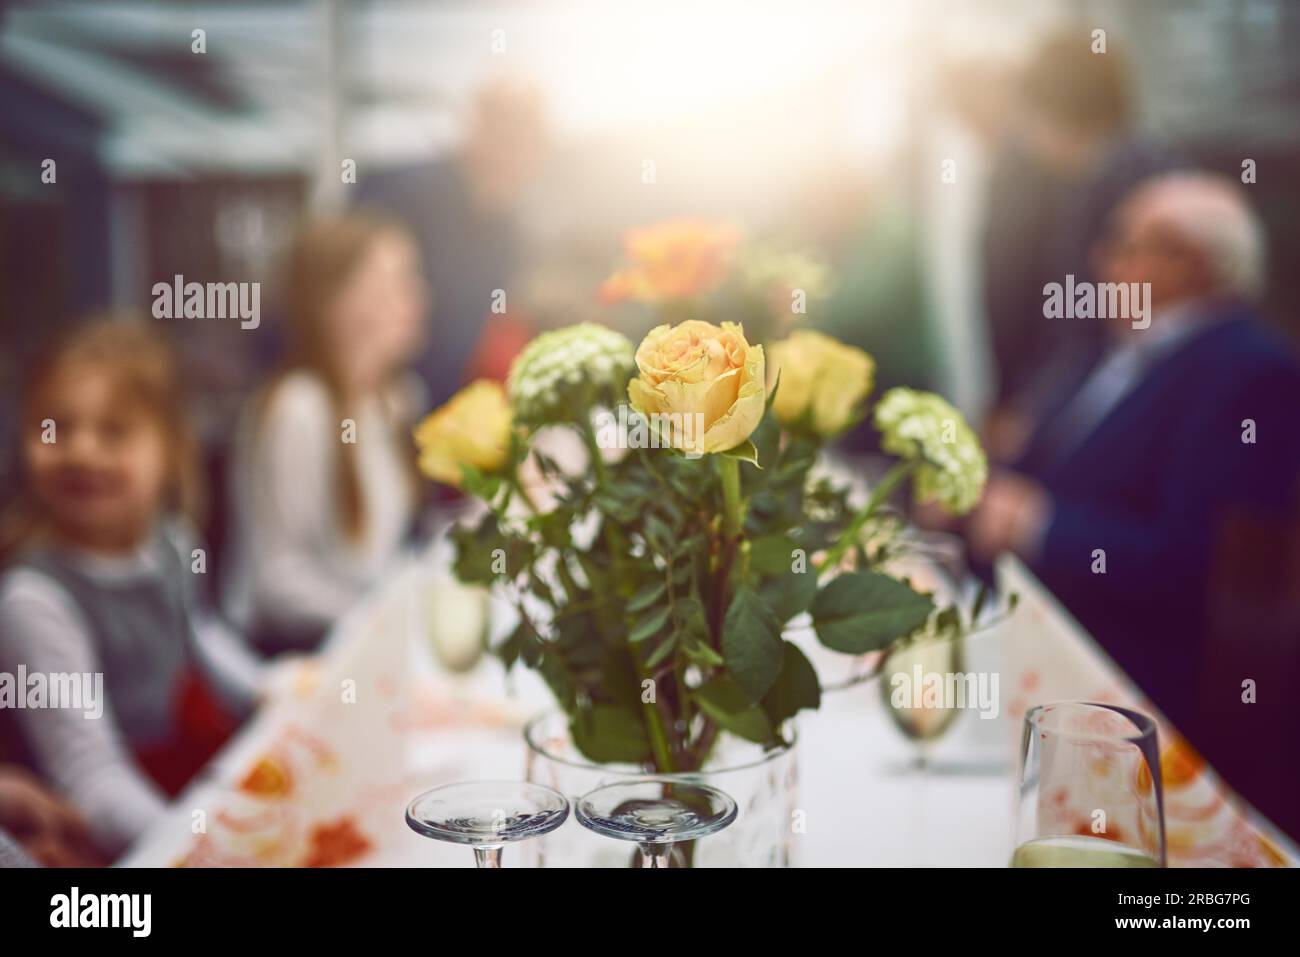 Vase of fresh yellow and orange flowers as a table centerpiece at a dinner party with selective focus to the arrangement and blurred people Stock Photo